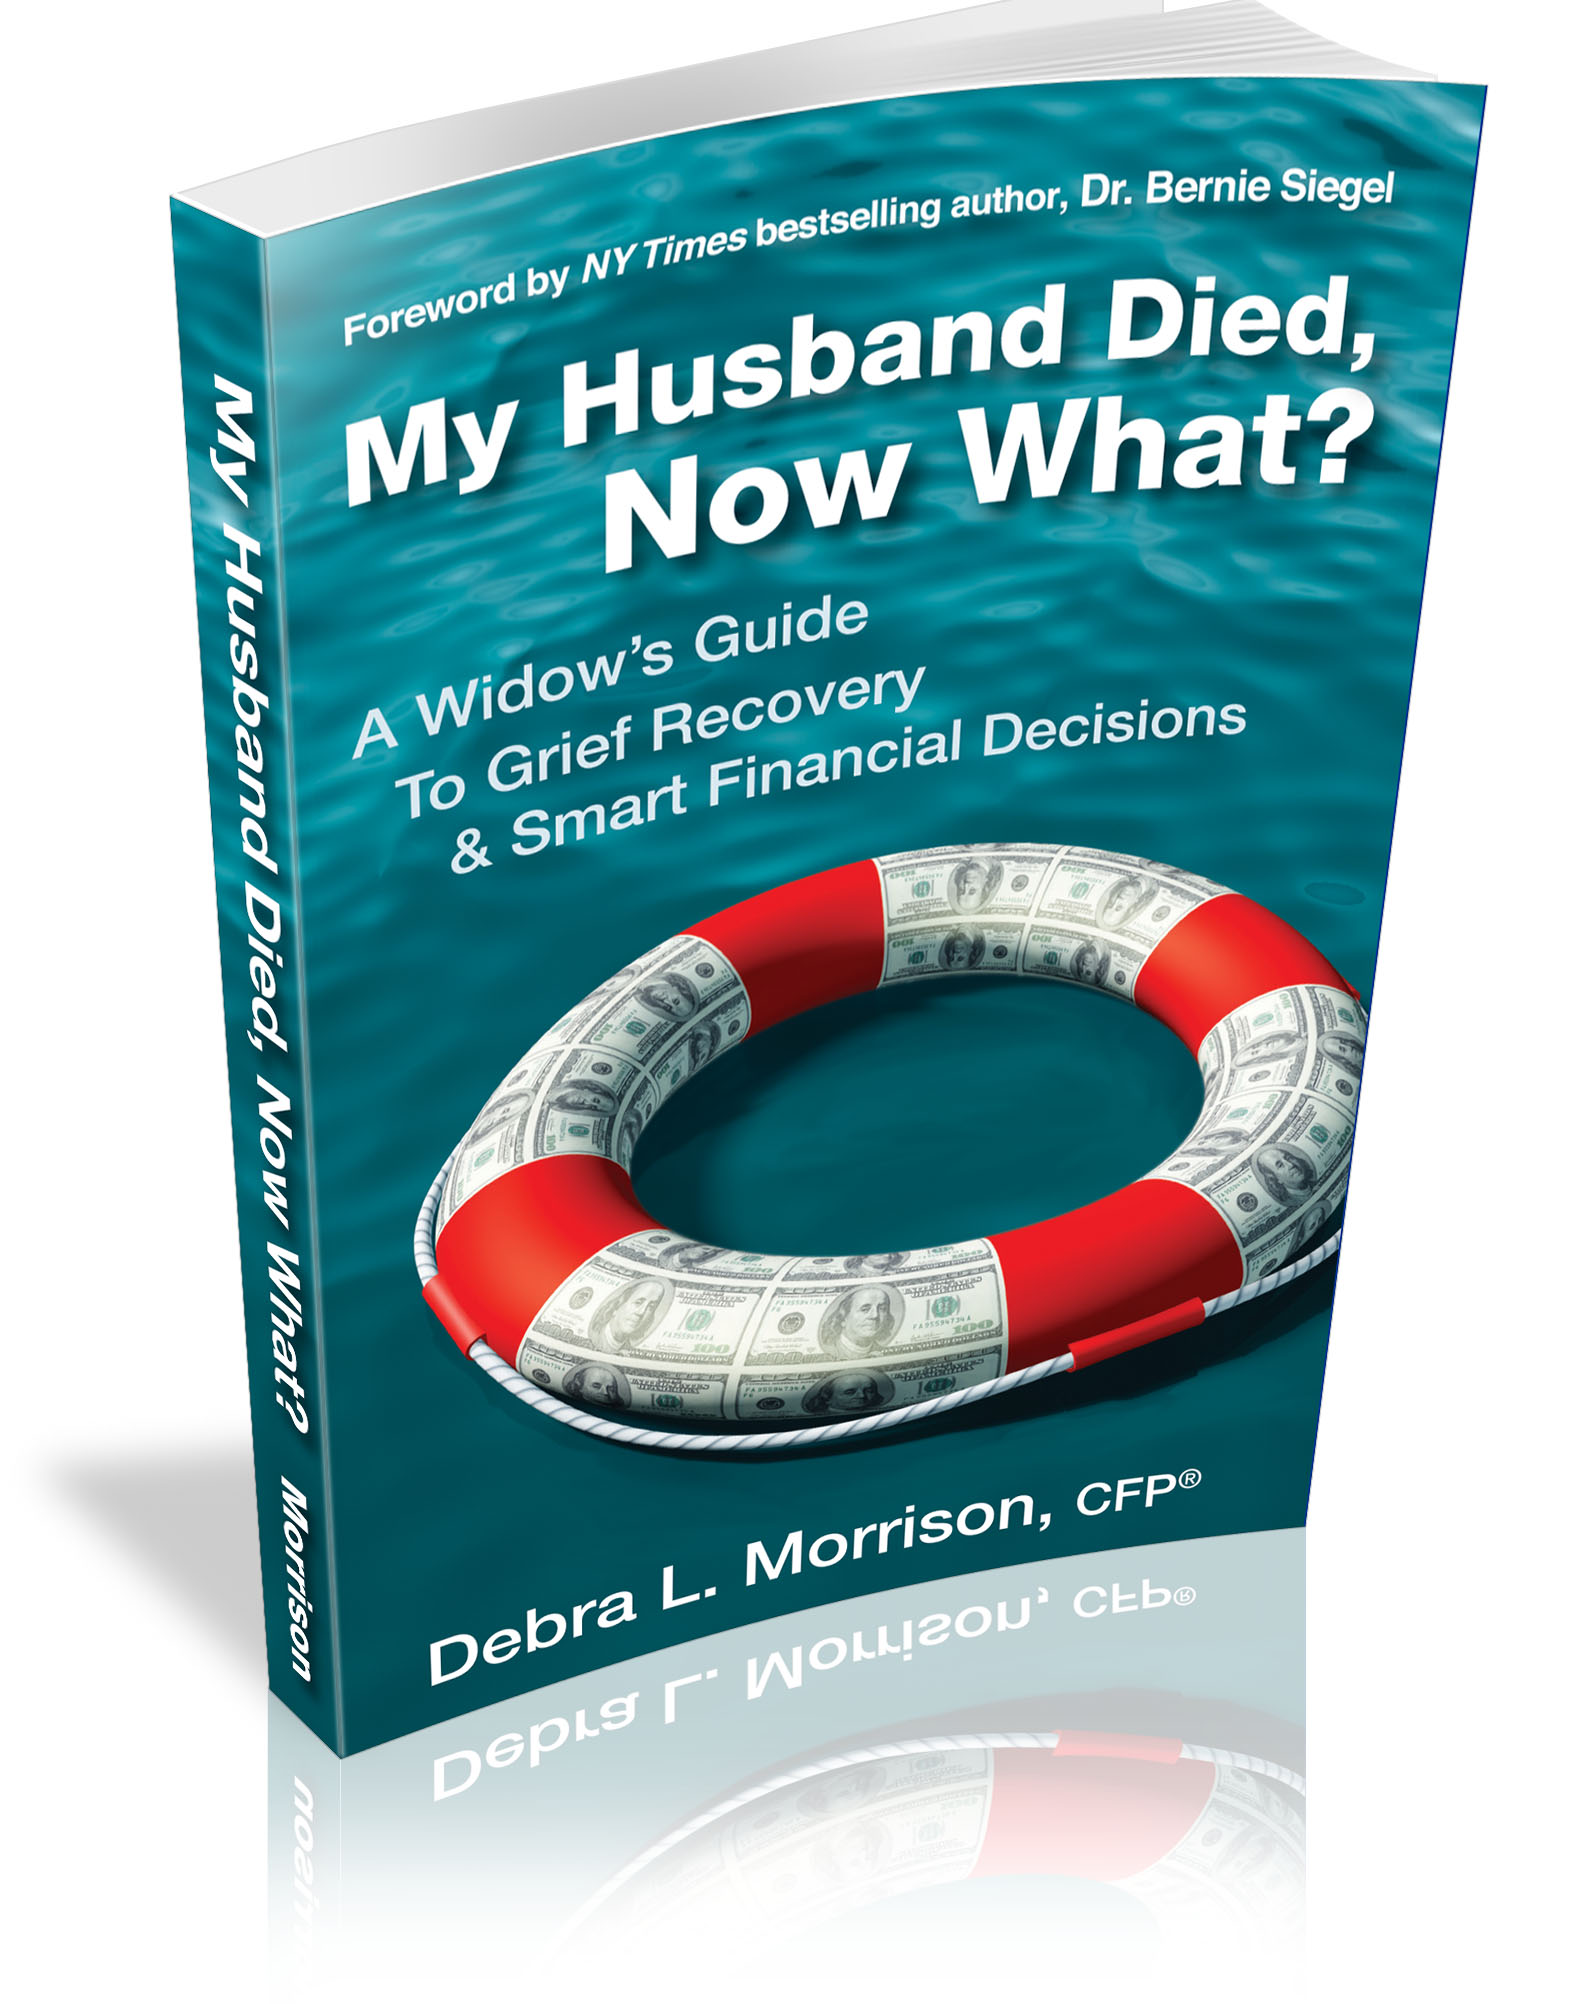 My Husband Died, Now What?